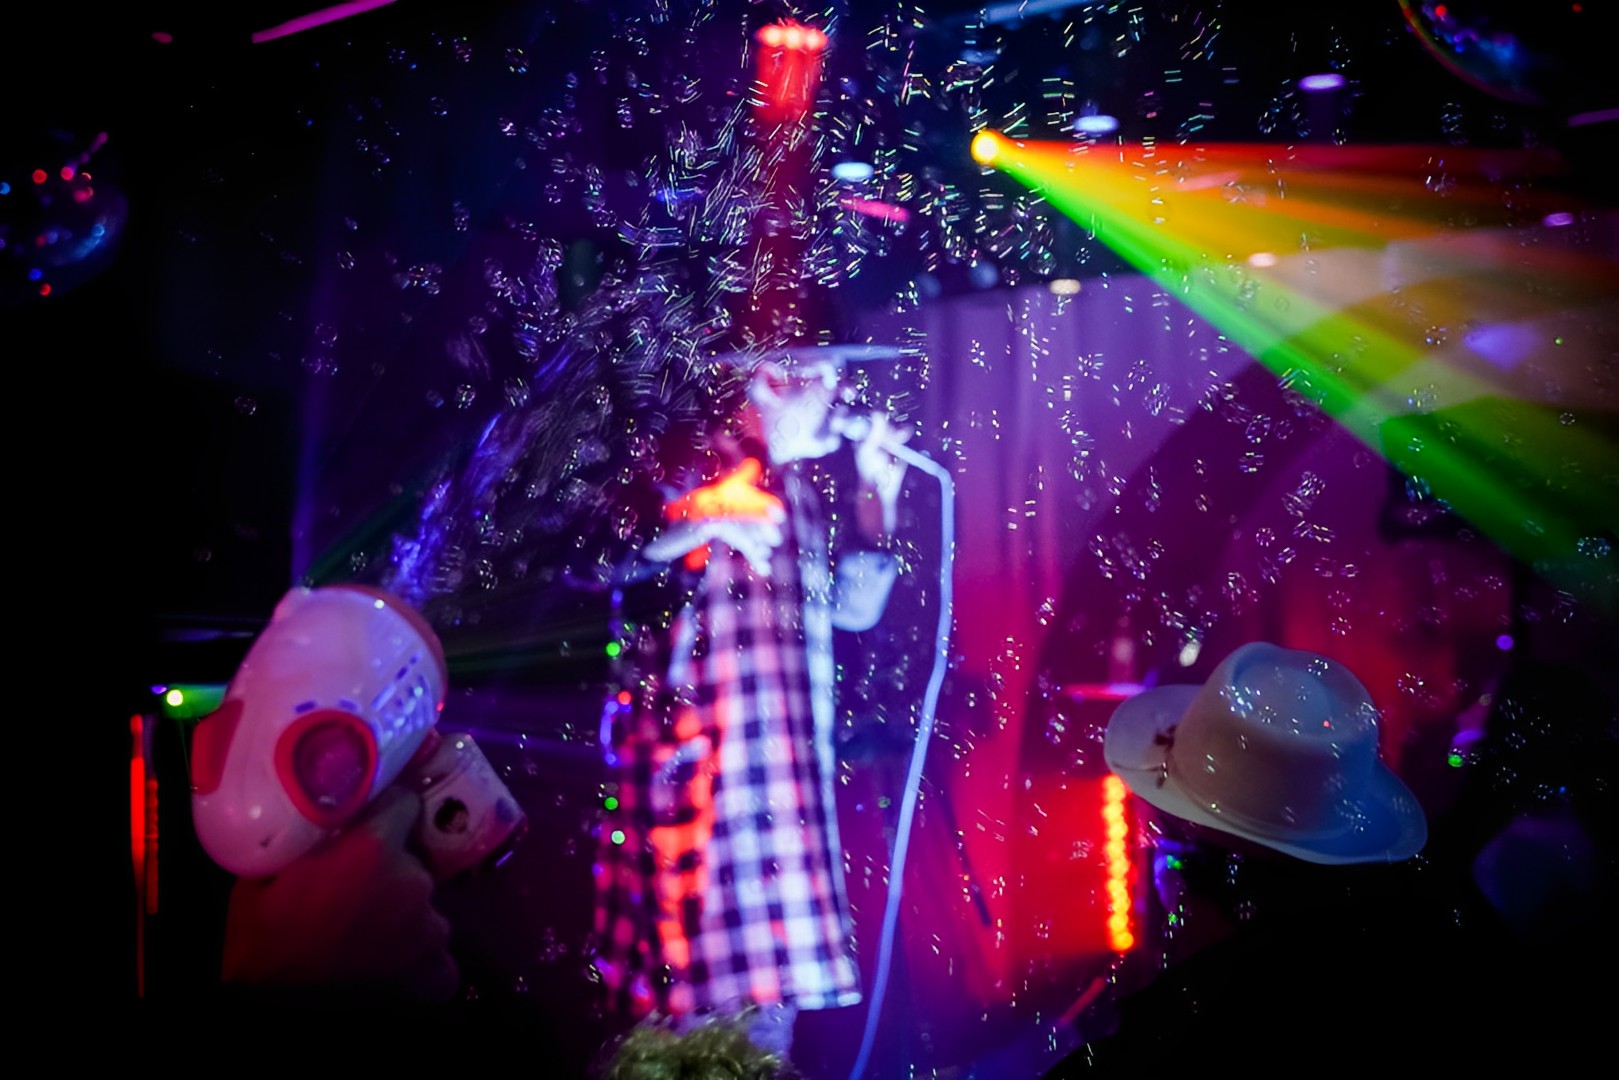 A hand holding a bubble gun, a single blurred in the background on stage